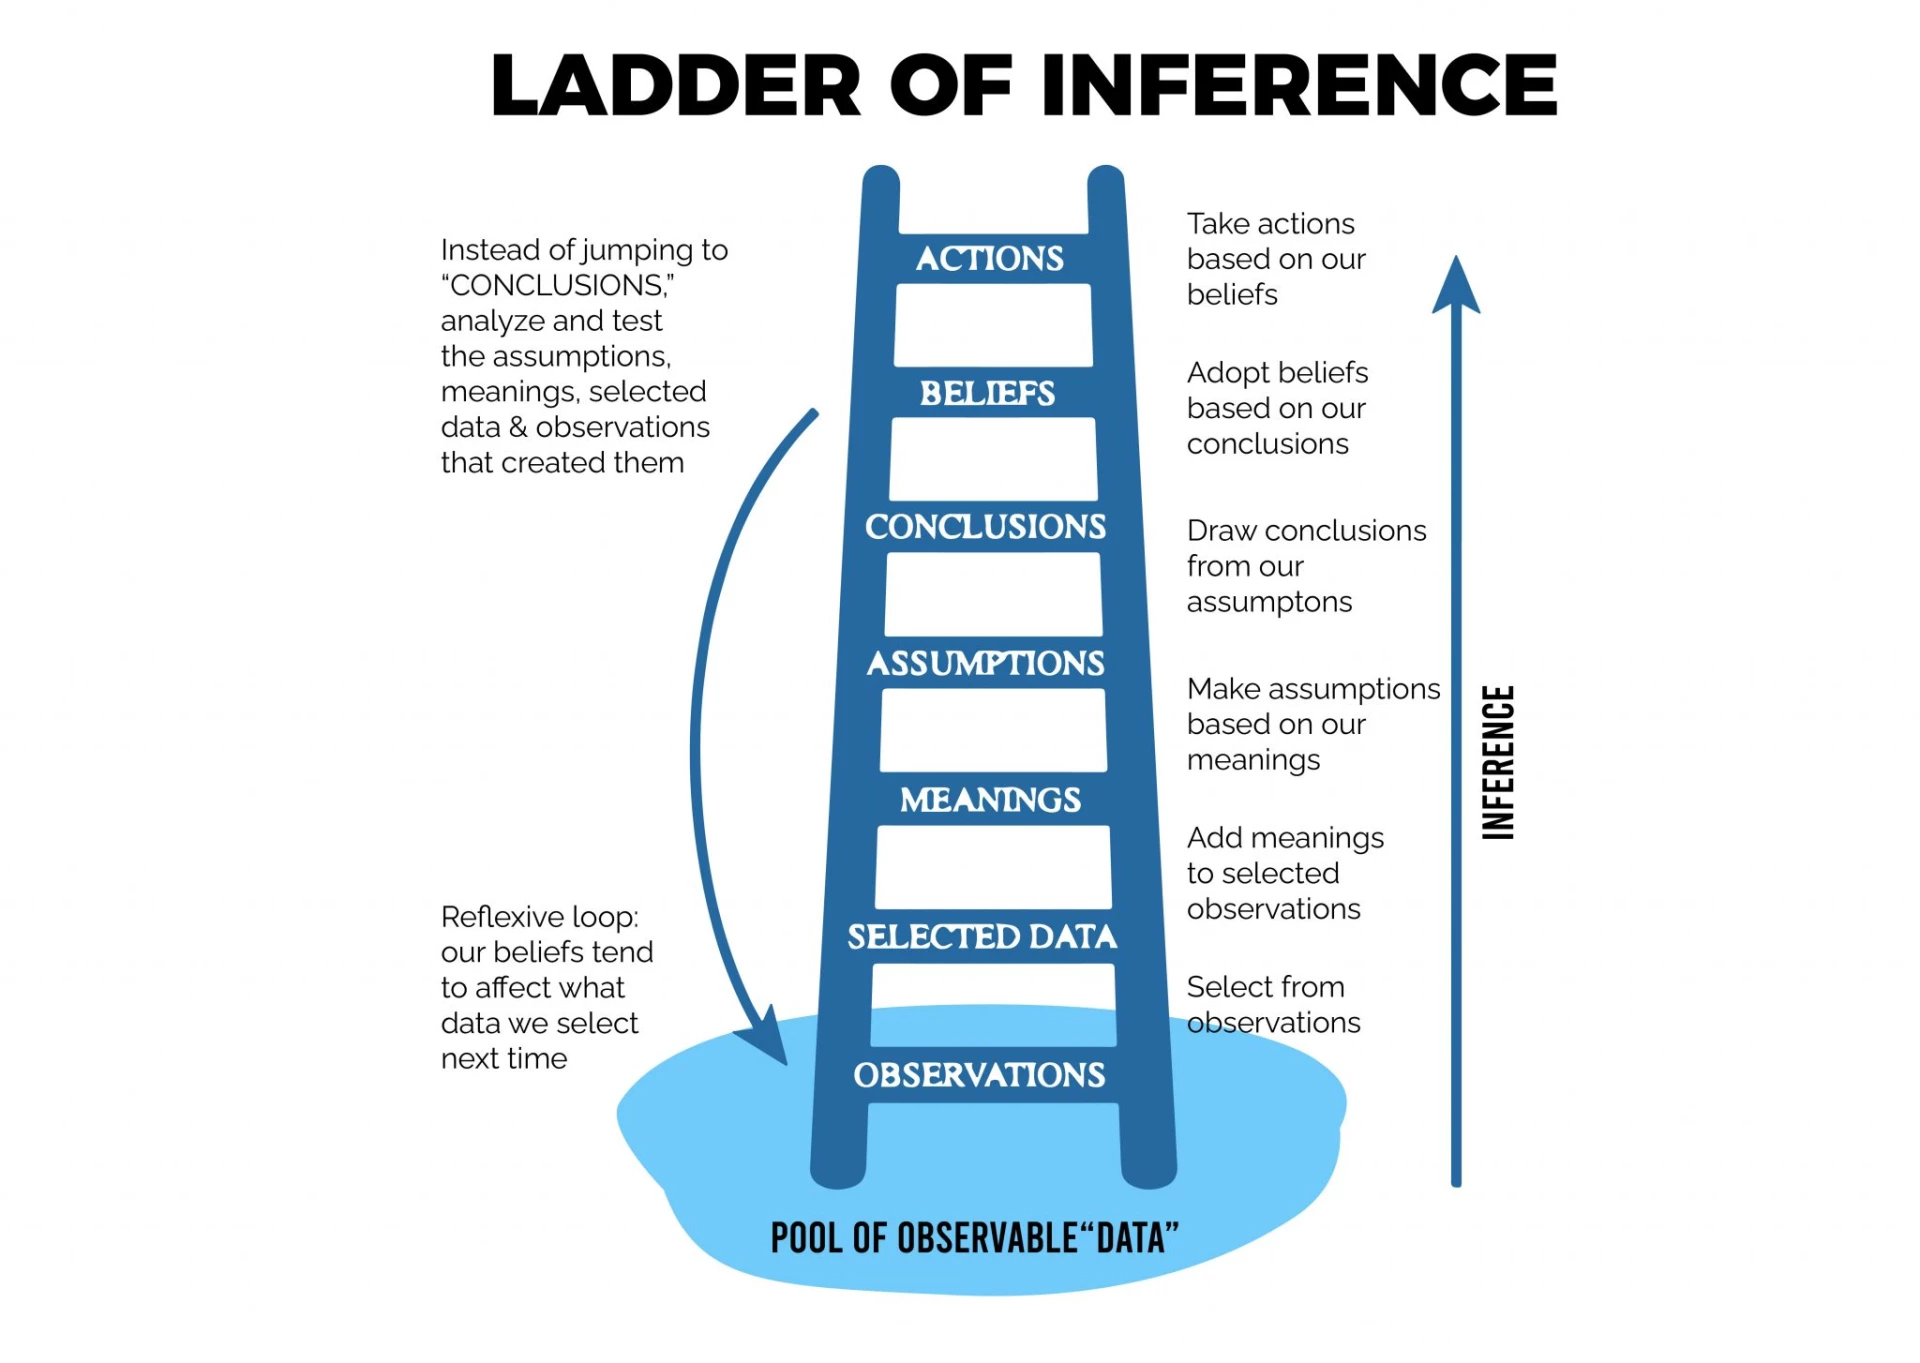 LADDER OF INFERENCE